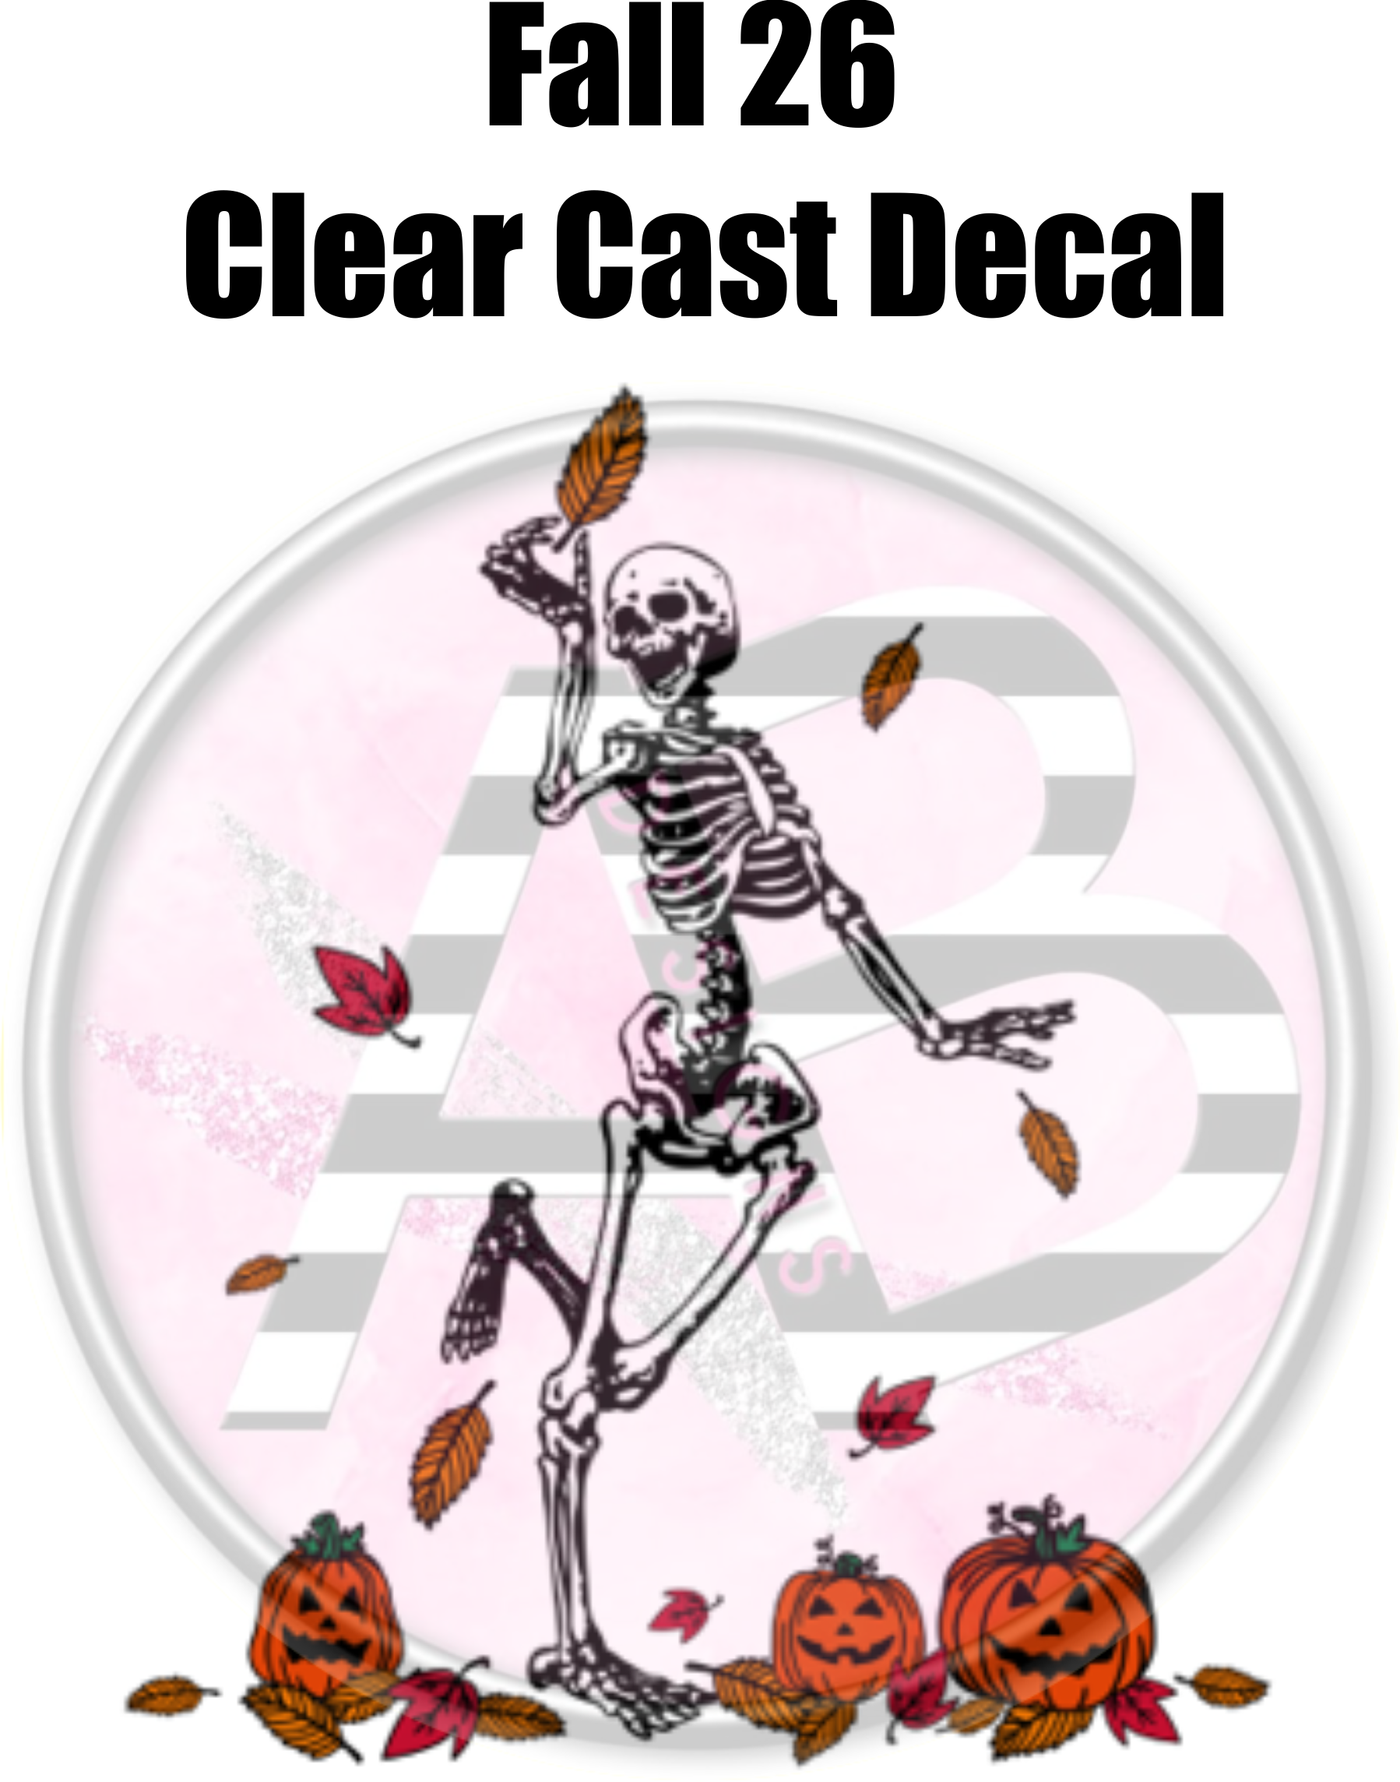 Fall 26 - Clear Cast Decal